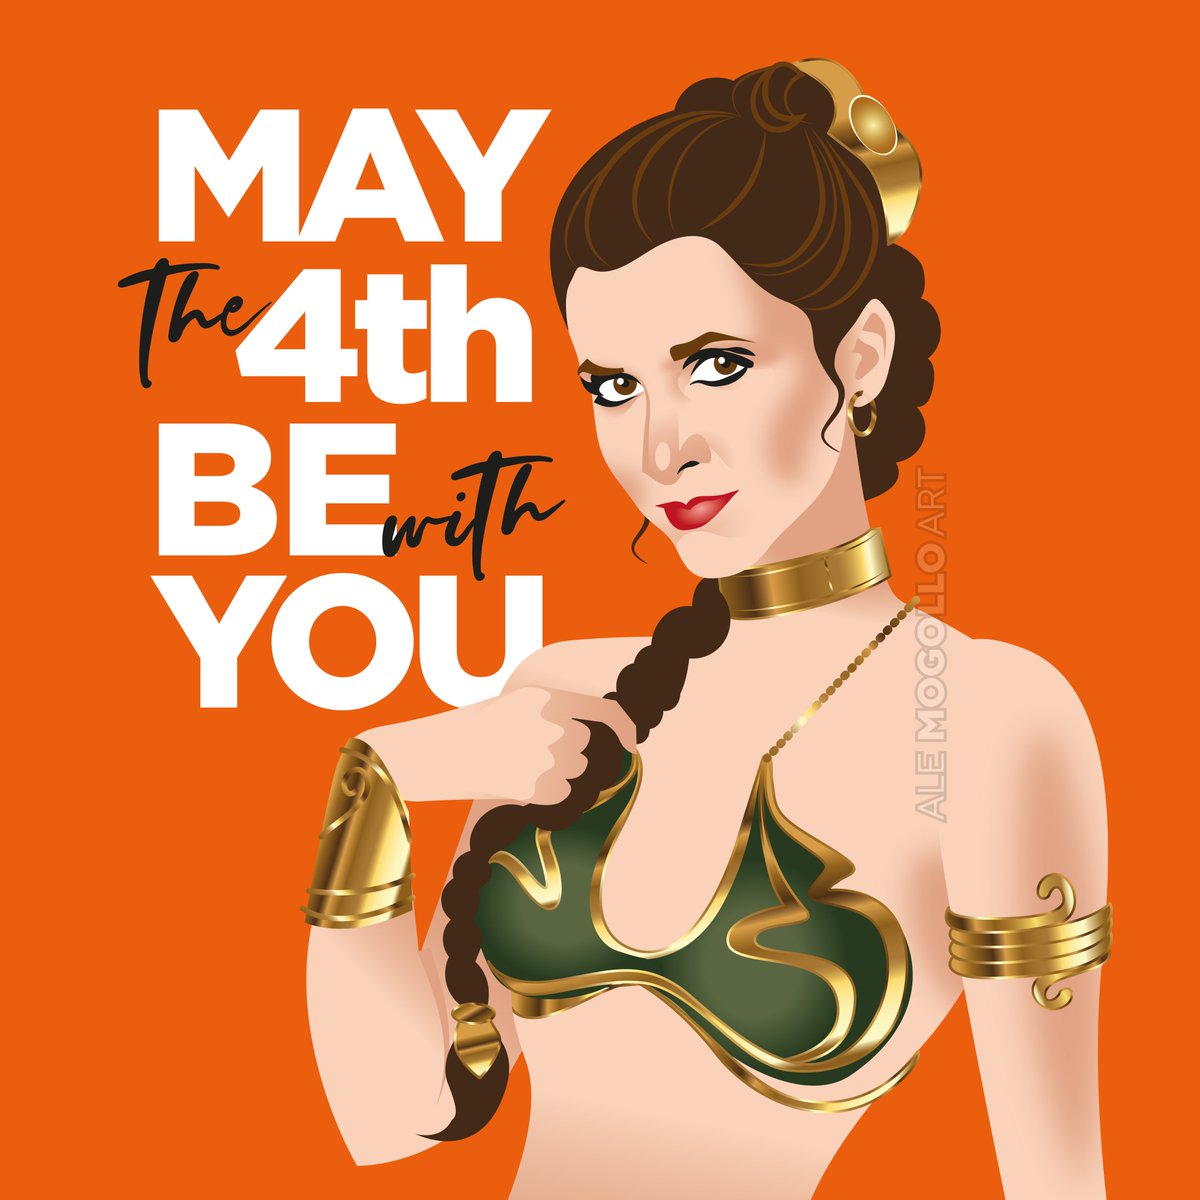 May the 4th be with you!
#carriefisher #princessleia #starwars #fanart #maythe4thbewithyou #alejandromogolloart